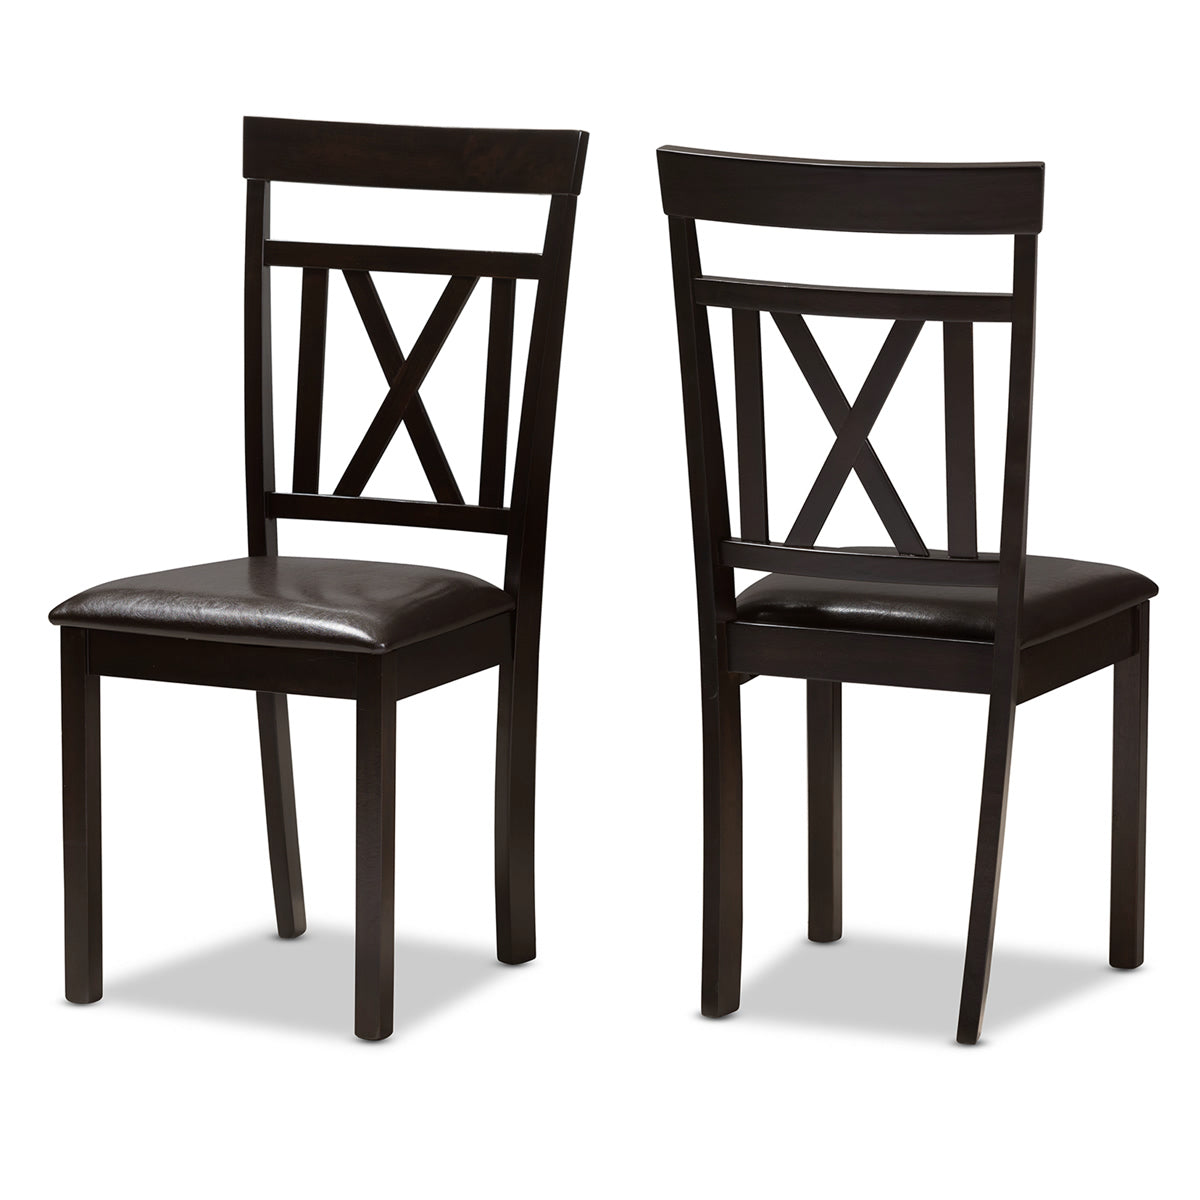 Baxton Studio Rosie Modern and Contemporary Dark Brown Faux Leather Upholstered Dining Chair (Set of 2) Baxton Studio-dining chair-Minimal And Modern - 1